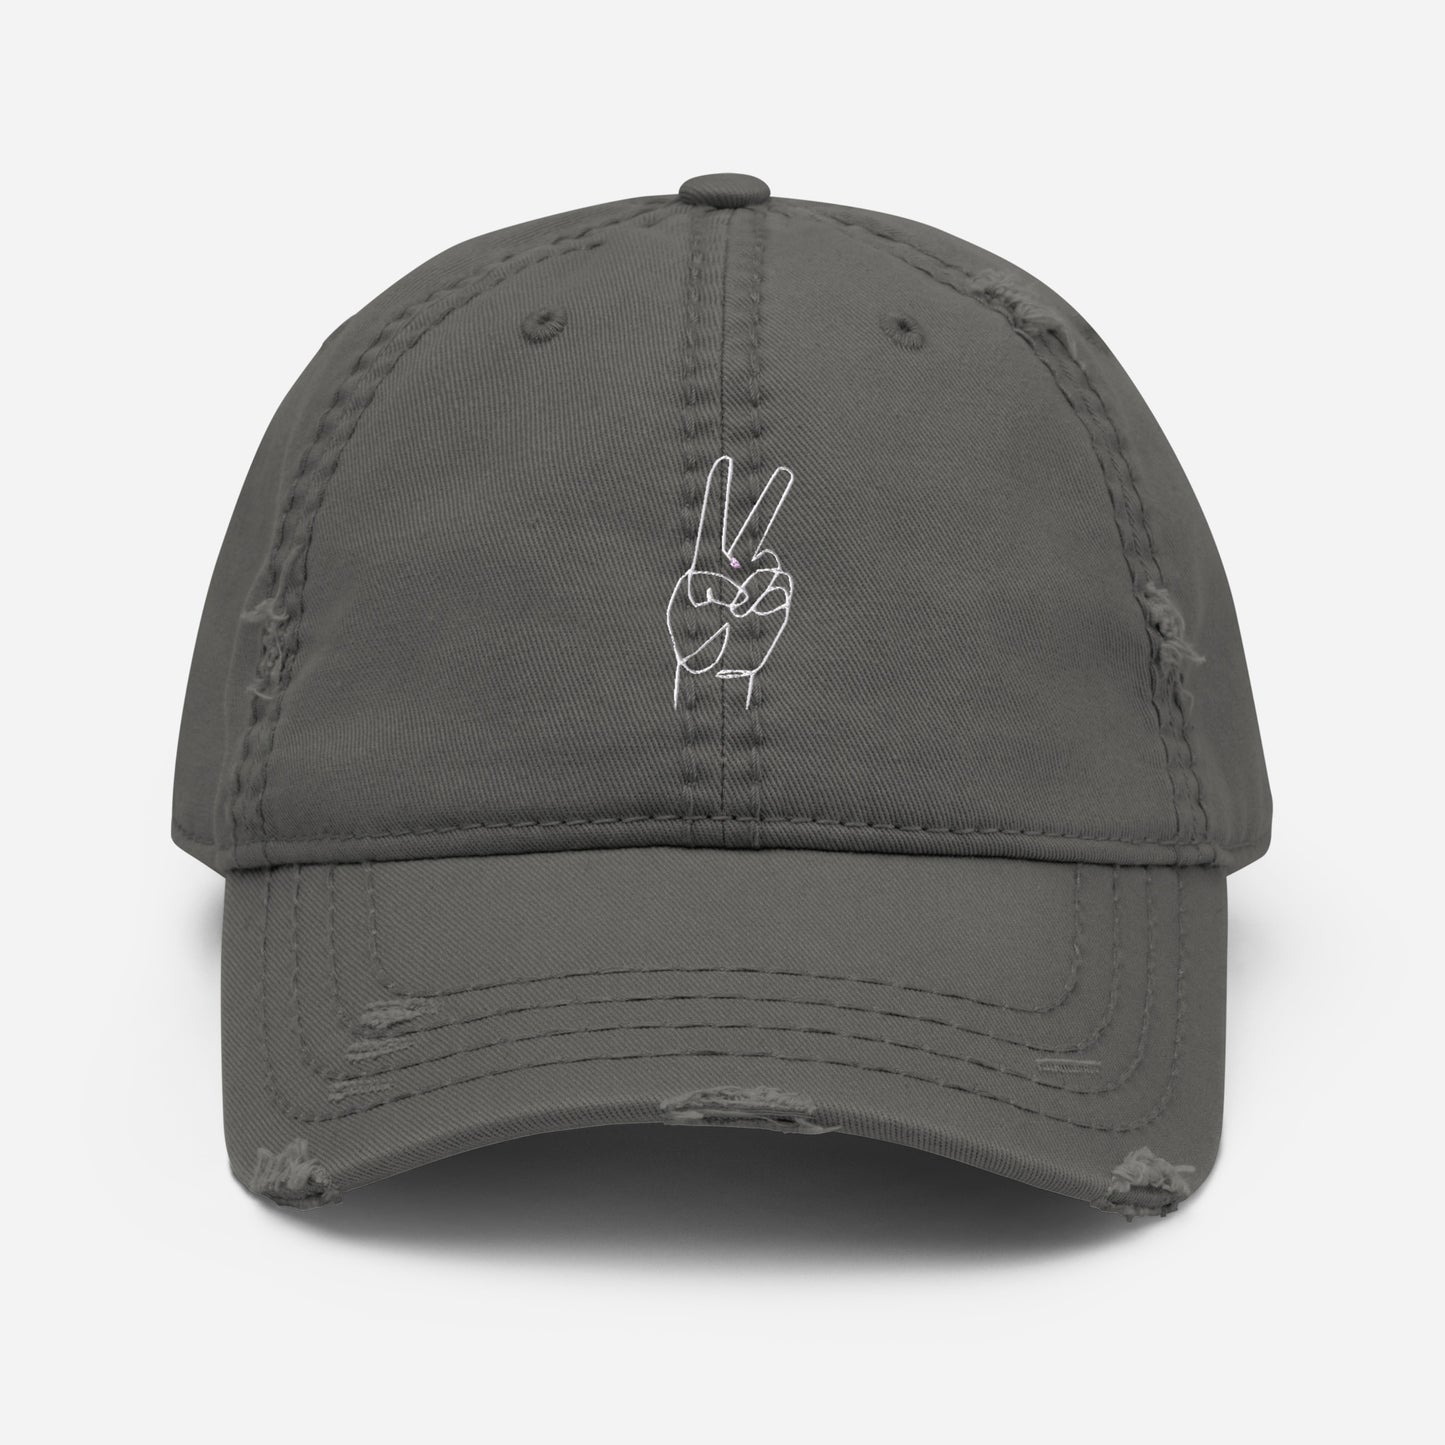 MANIFEST PEACE Embroidered Distressed Hat